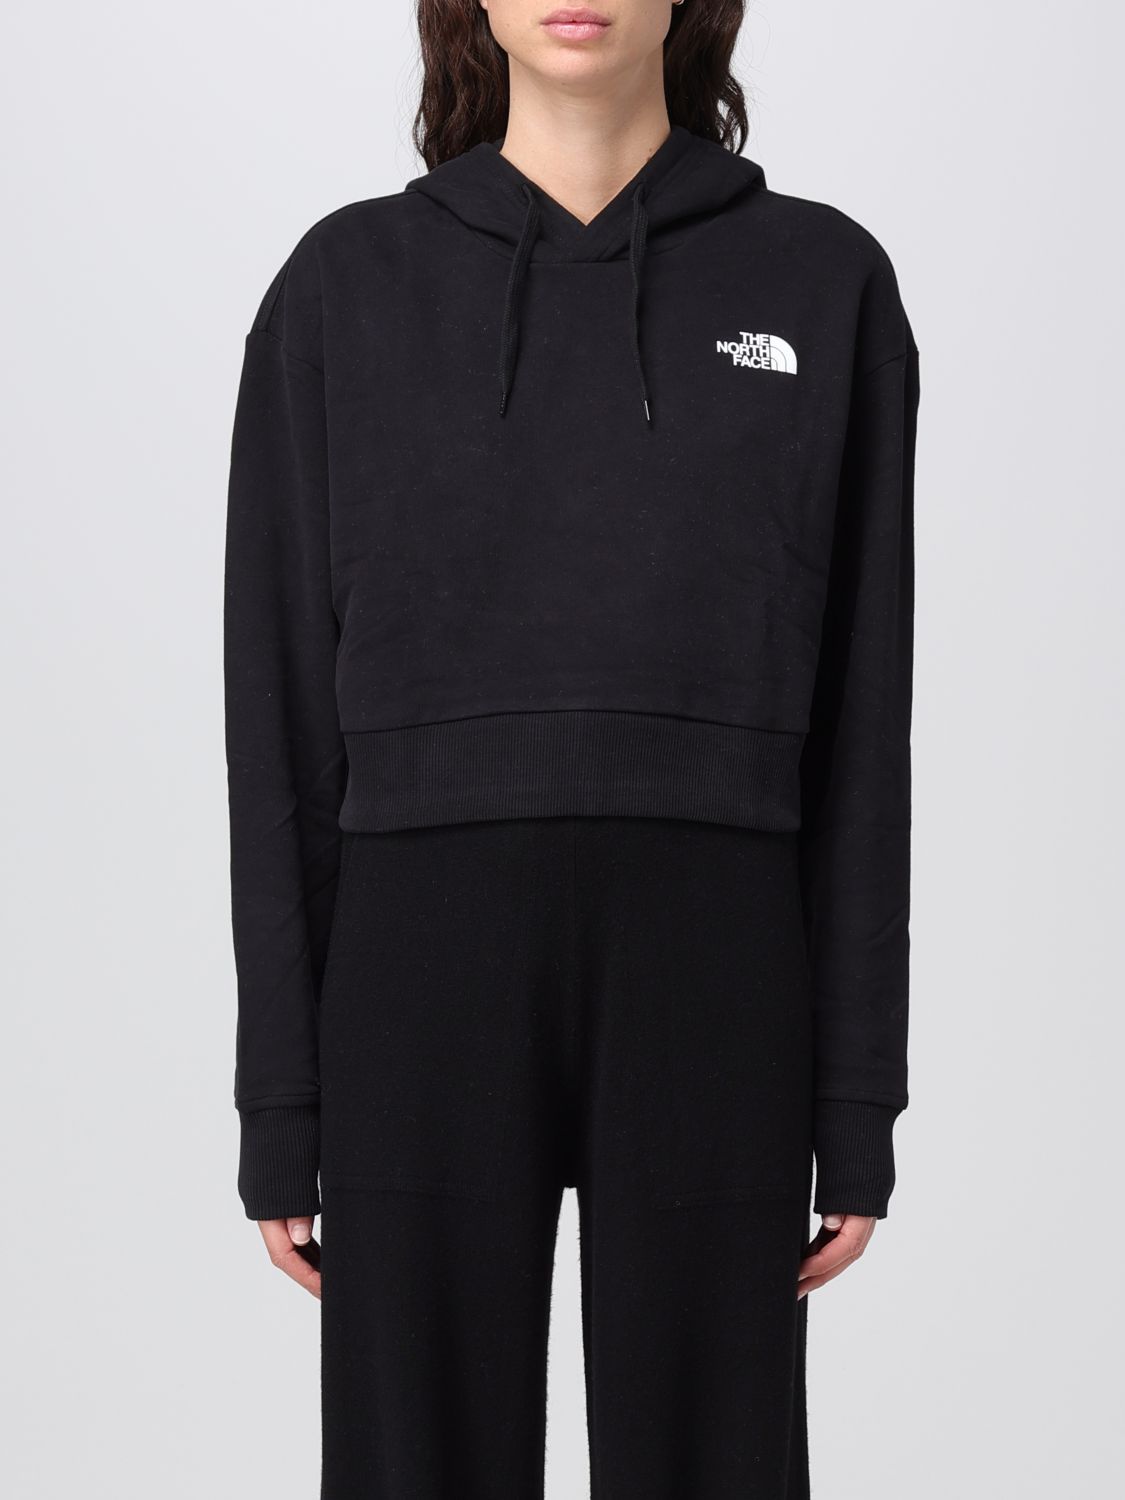 THE NORTH FACE SWEATSHIRT THE NORTH FACE WOMAN COLOR BLACK,e55463002